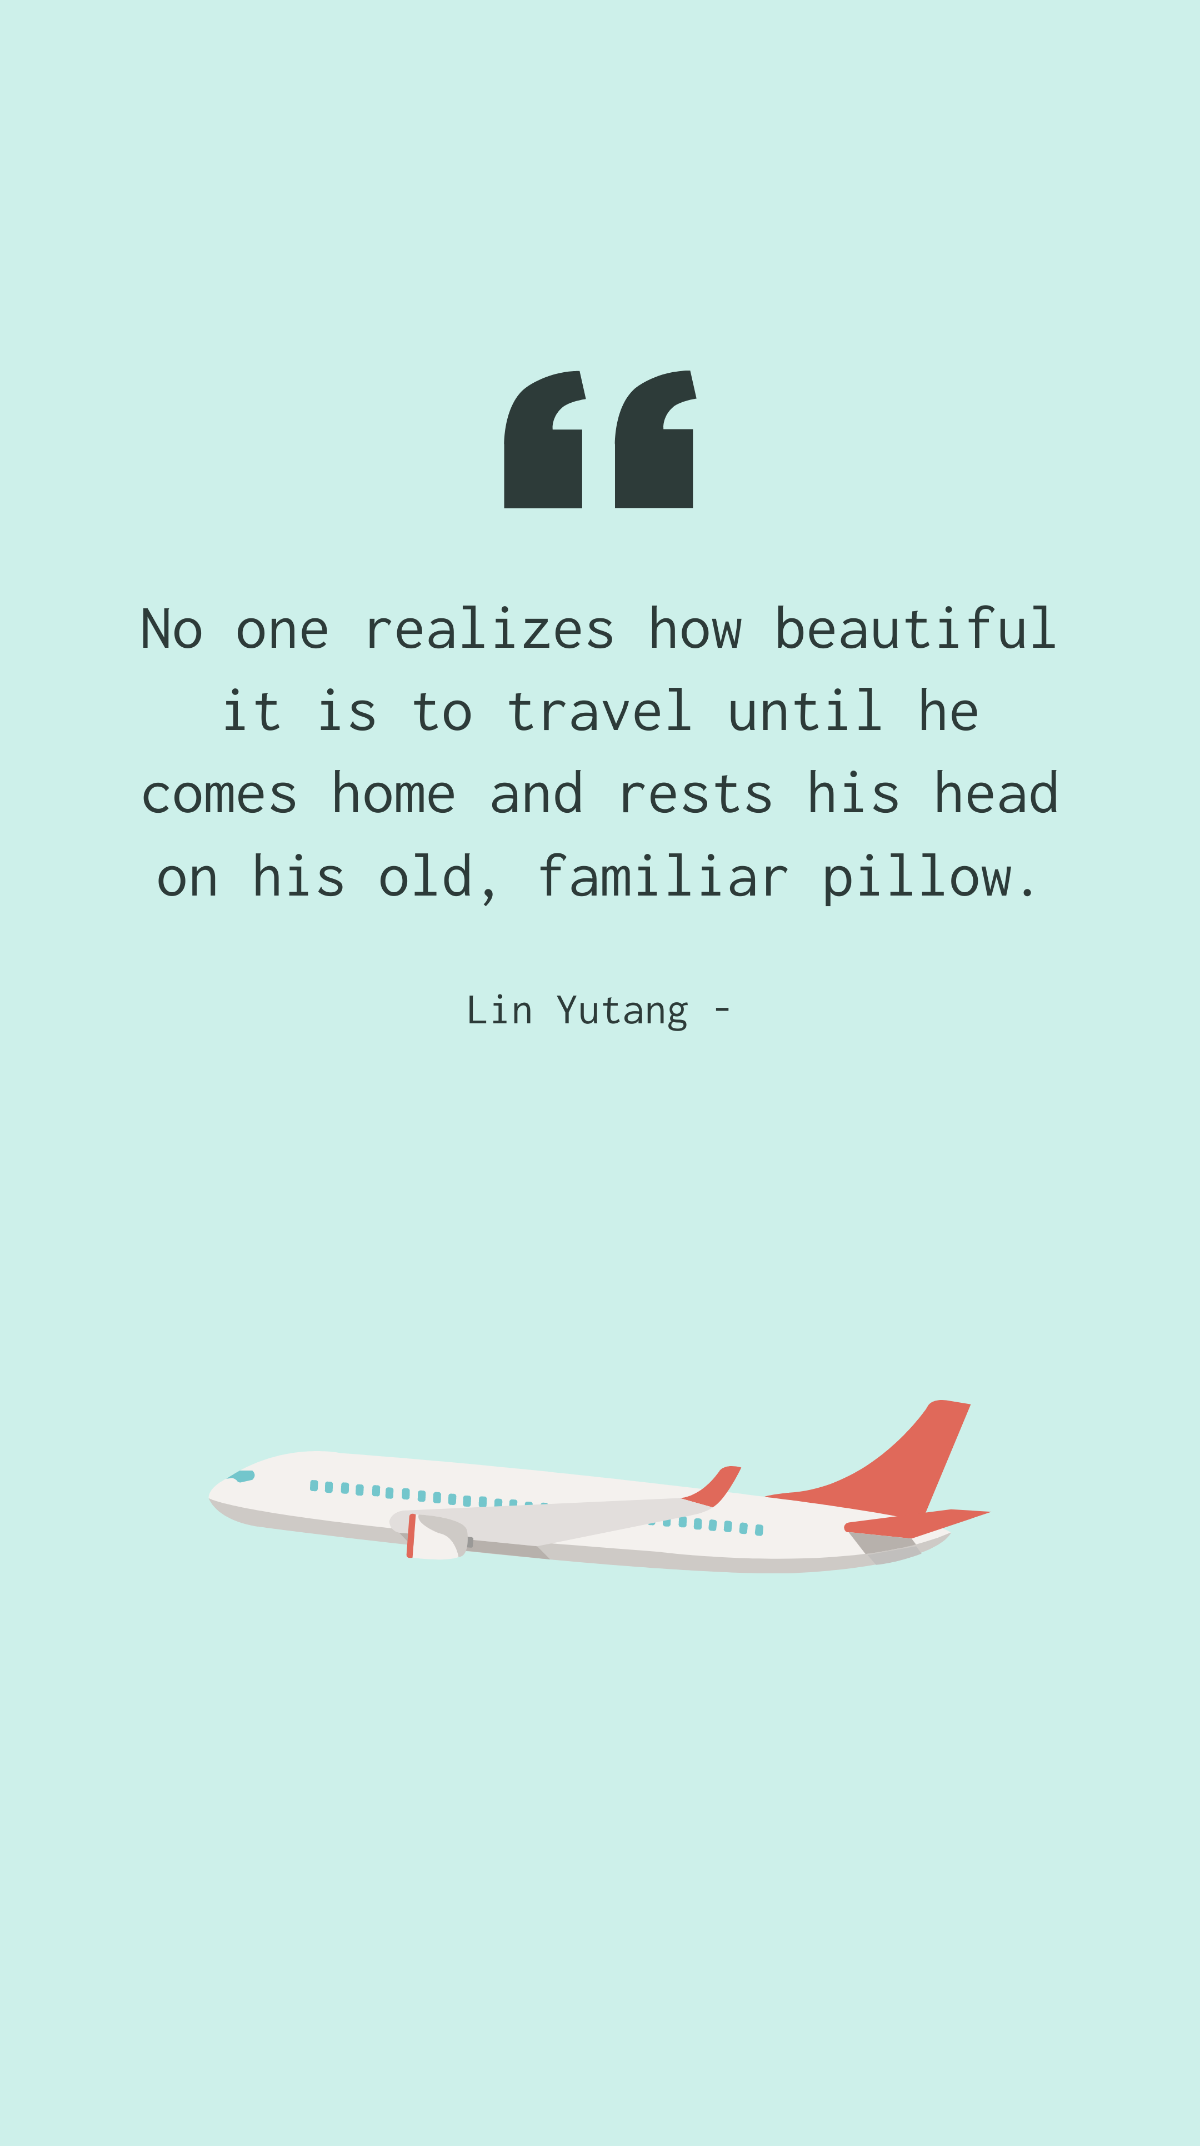 Lin Yutang - No one realizes how beautiful it is to travel until he comes home and rests his head on his old, familiar pillow. Template